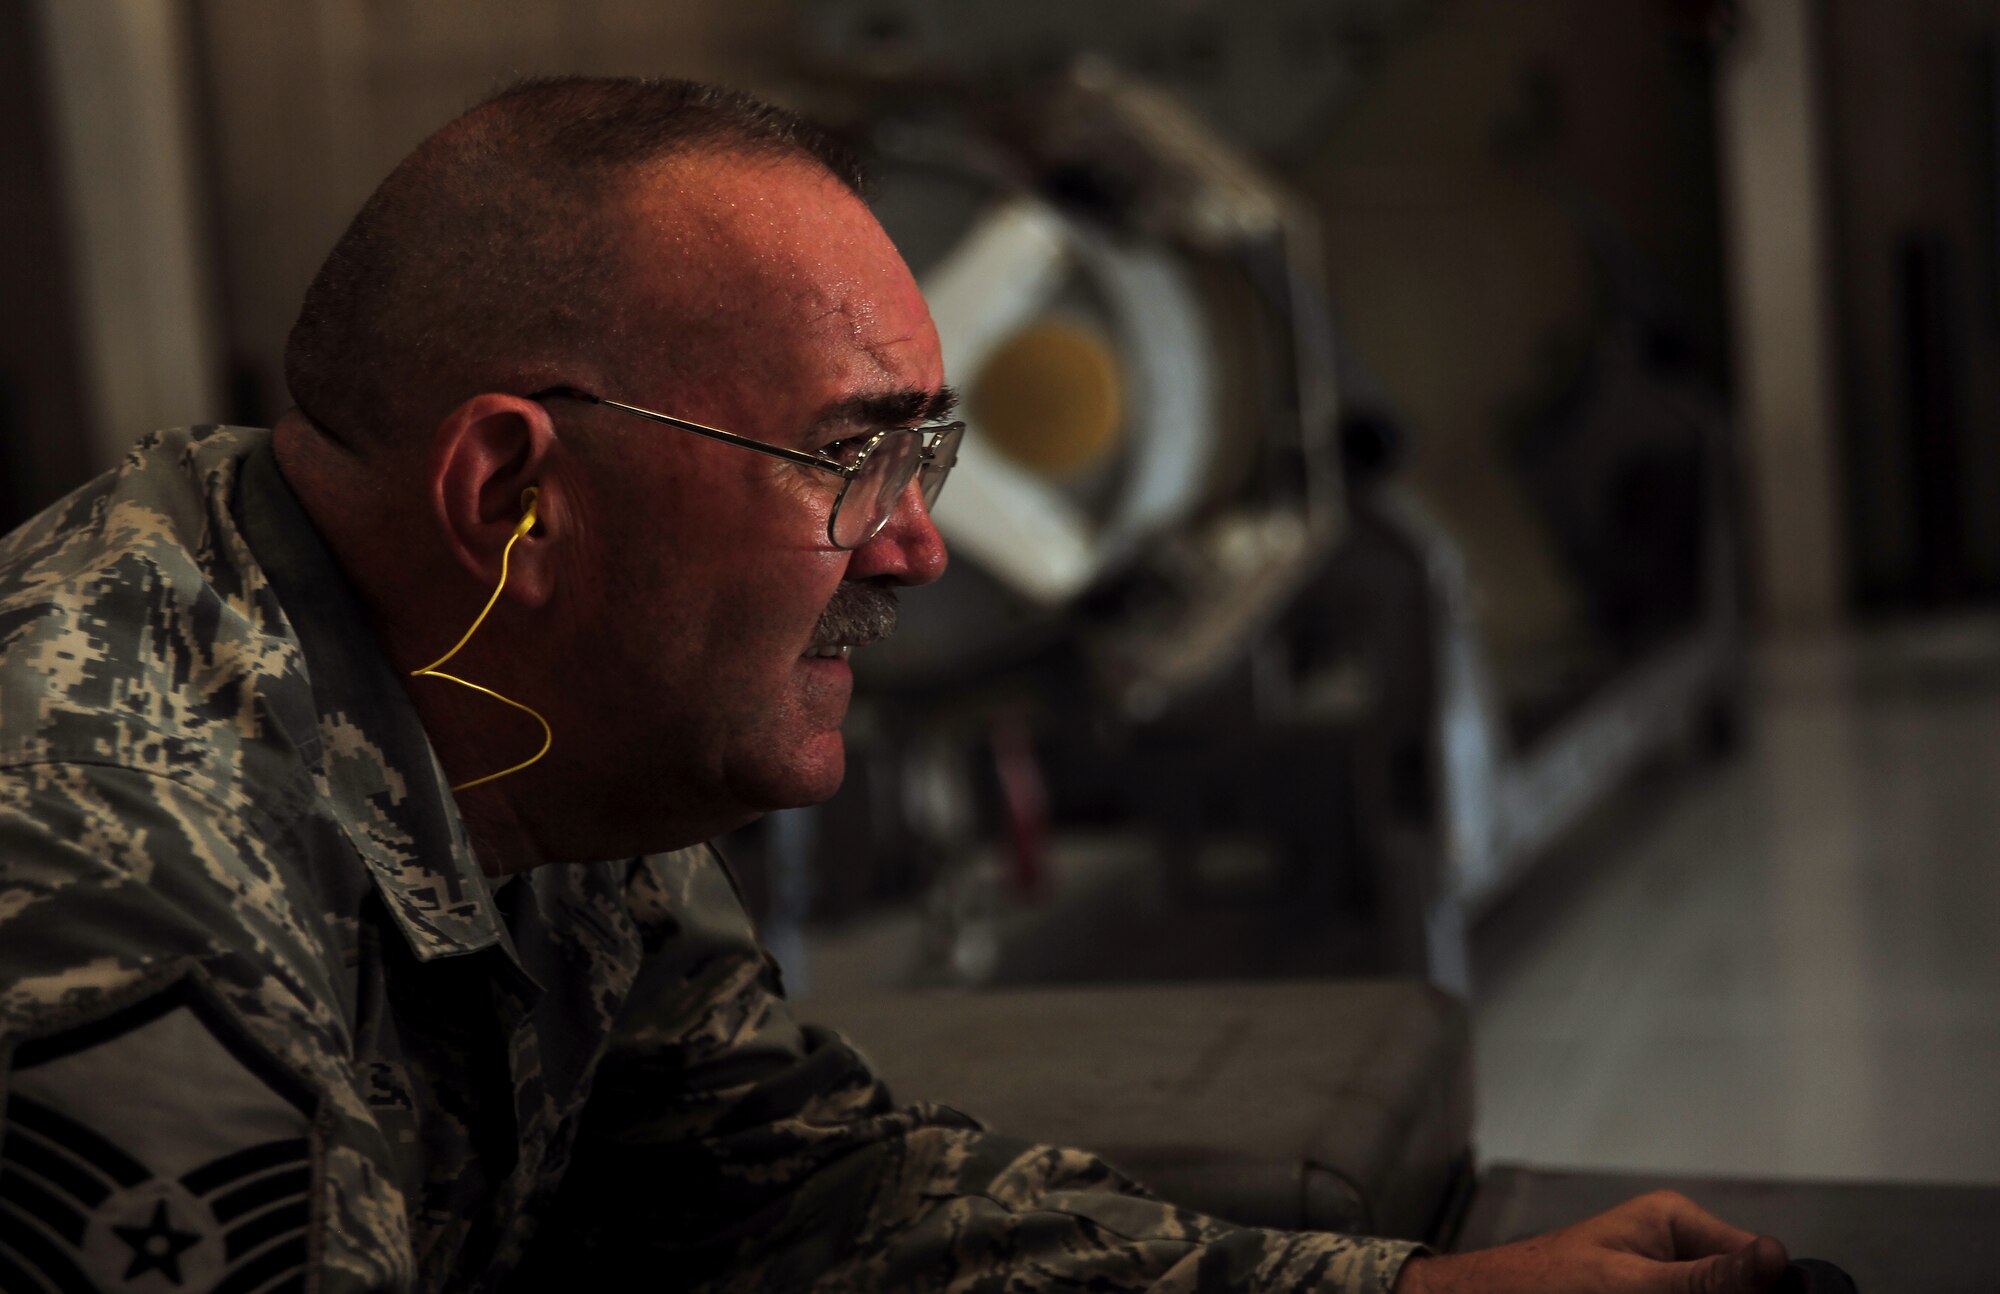 U.S. Air Force Master Sgt. Allen Anderson, an aircraft armament systems mechanic assigned to the 131st Aircraft Maintenance Squadron, loads a GBU–31 version 1 trainer munition during certification training at Whiteman Air Force Base, Mo., June 28, 2016. Anderson holds the four man role on his load crew team, which gives him control of the jammer during munition loads. (U.S. Air Force photo by Senior Airman Jovan Banks)